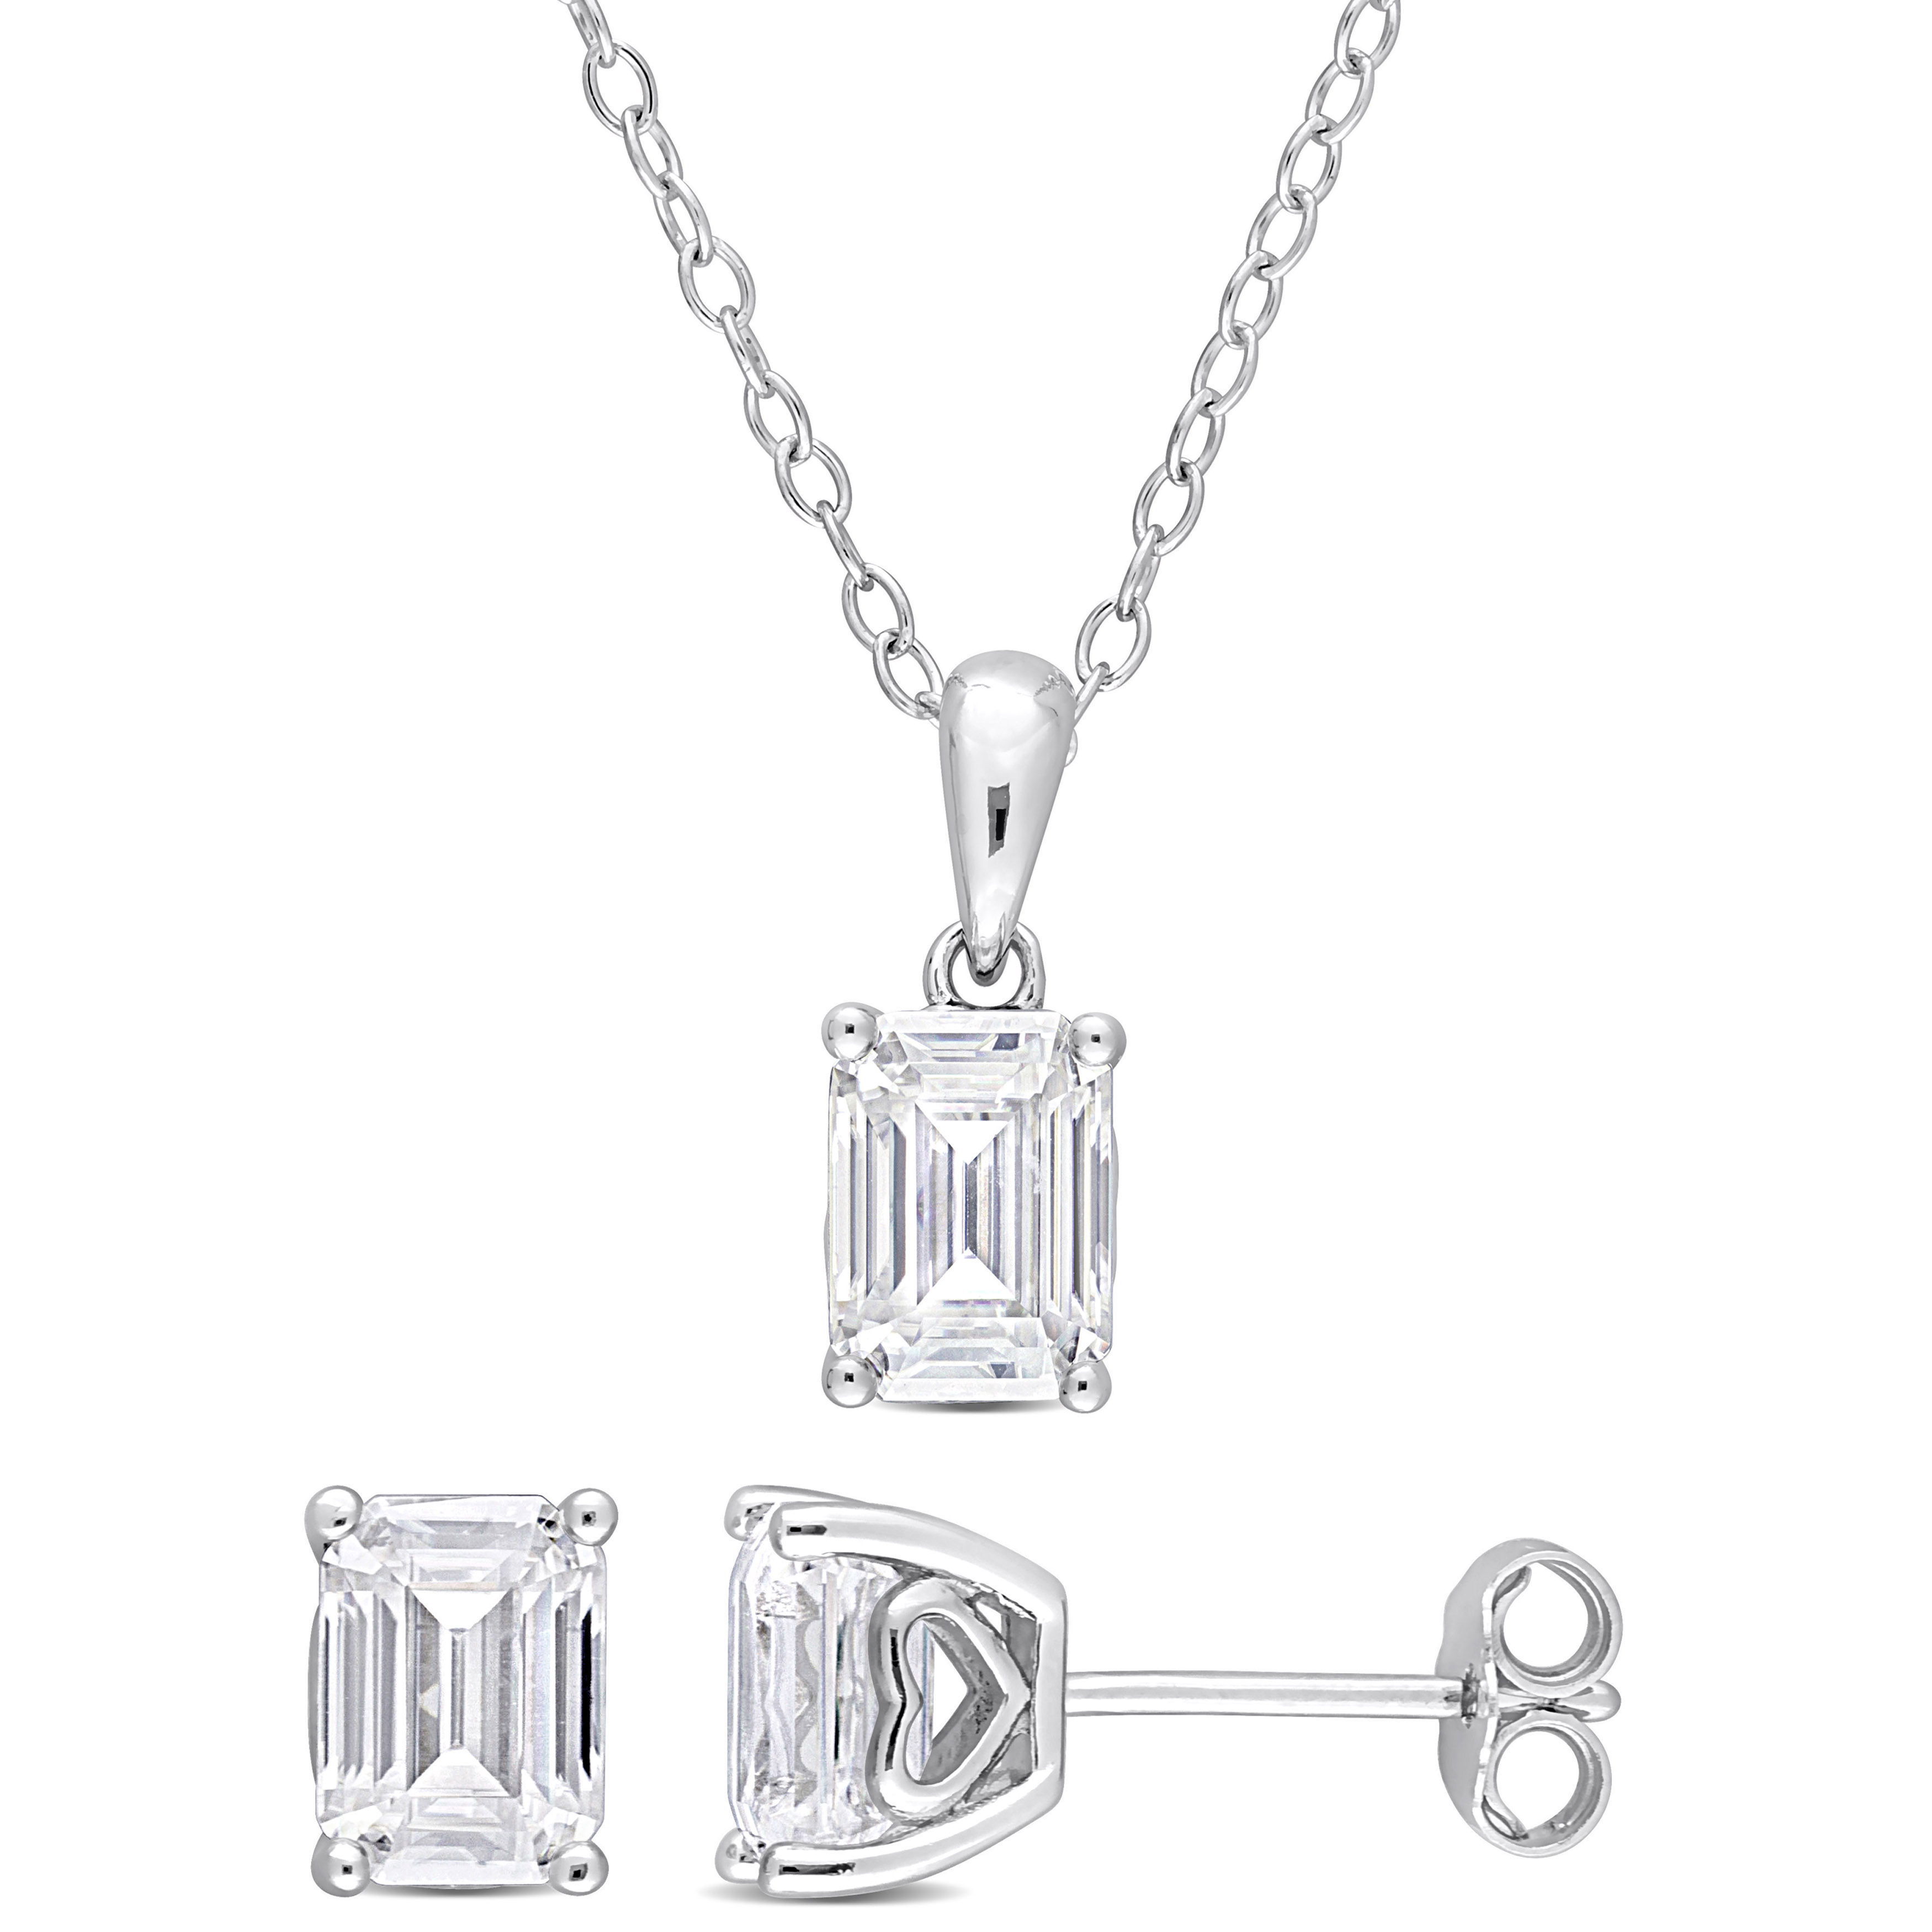 3 CT TGW Emerald-Cut and Octagon Created Moissanite 2-Piece Solitaire Pendant with Chain and Stud Earrings Set in Sterling Silver